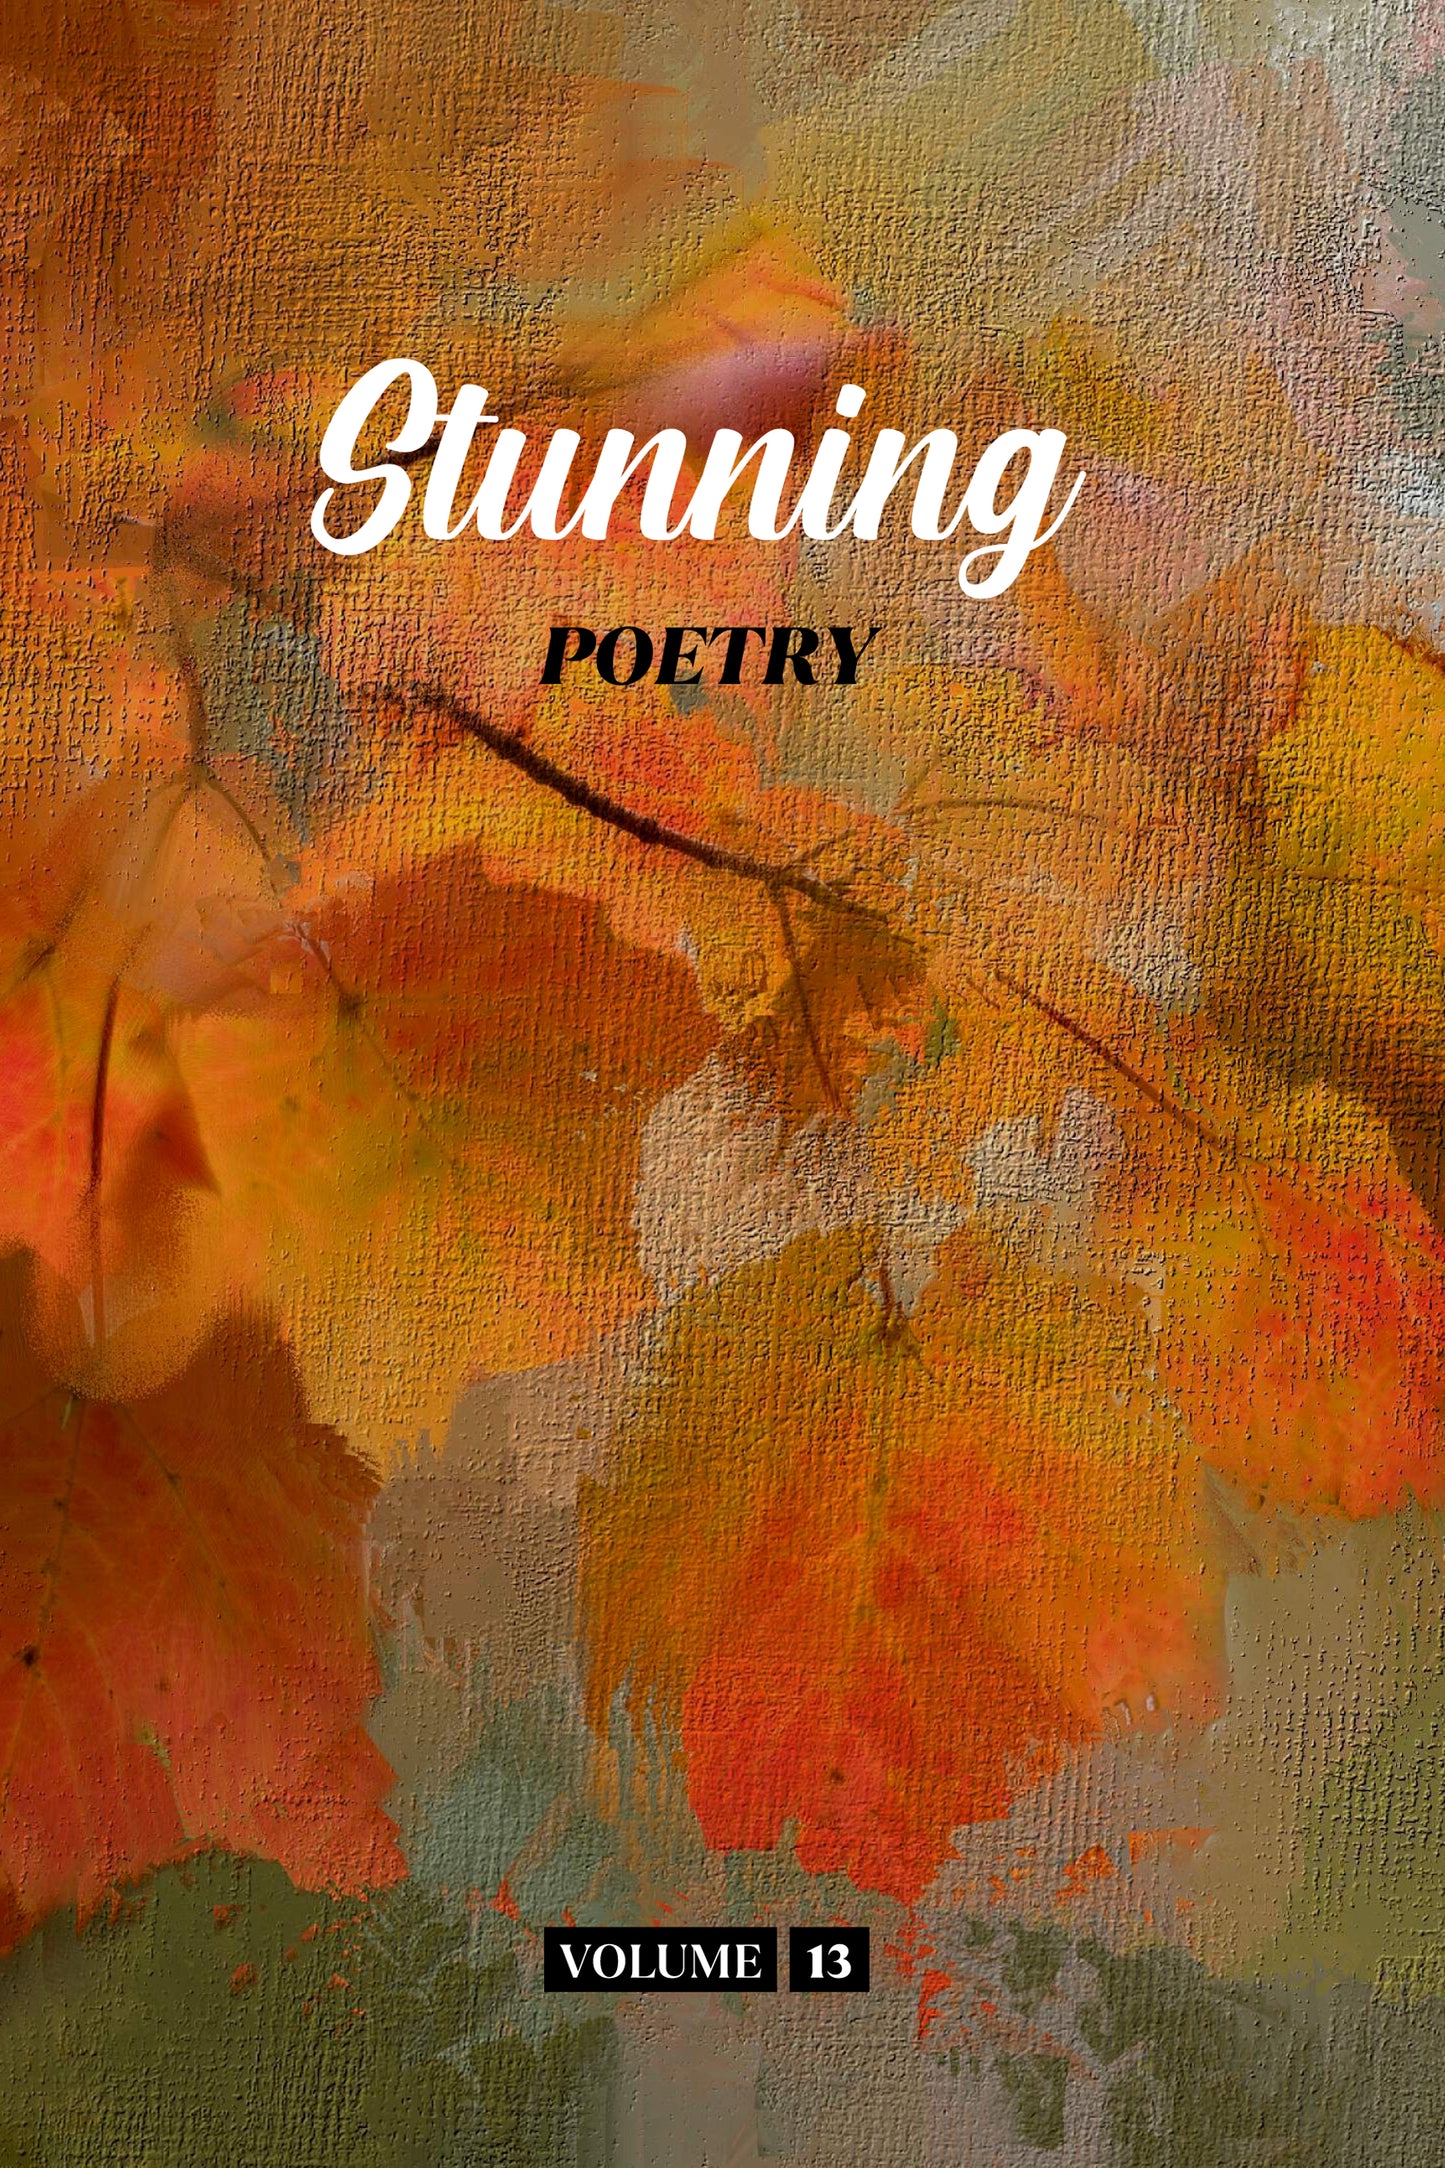 Stunning Poetry (Volume 13) - Physical Book